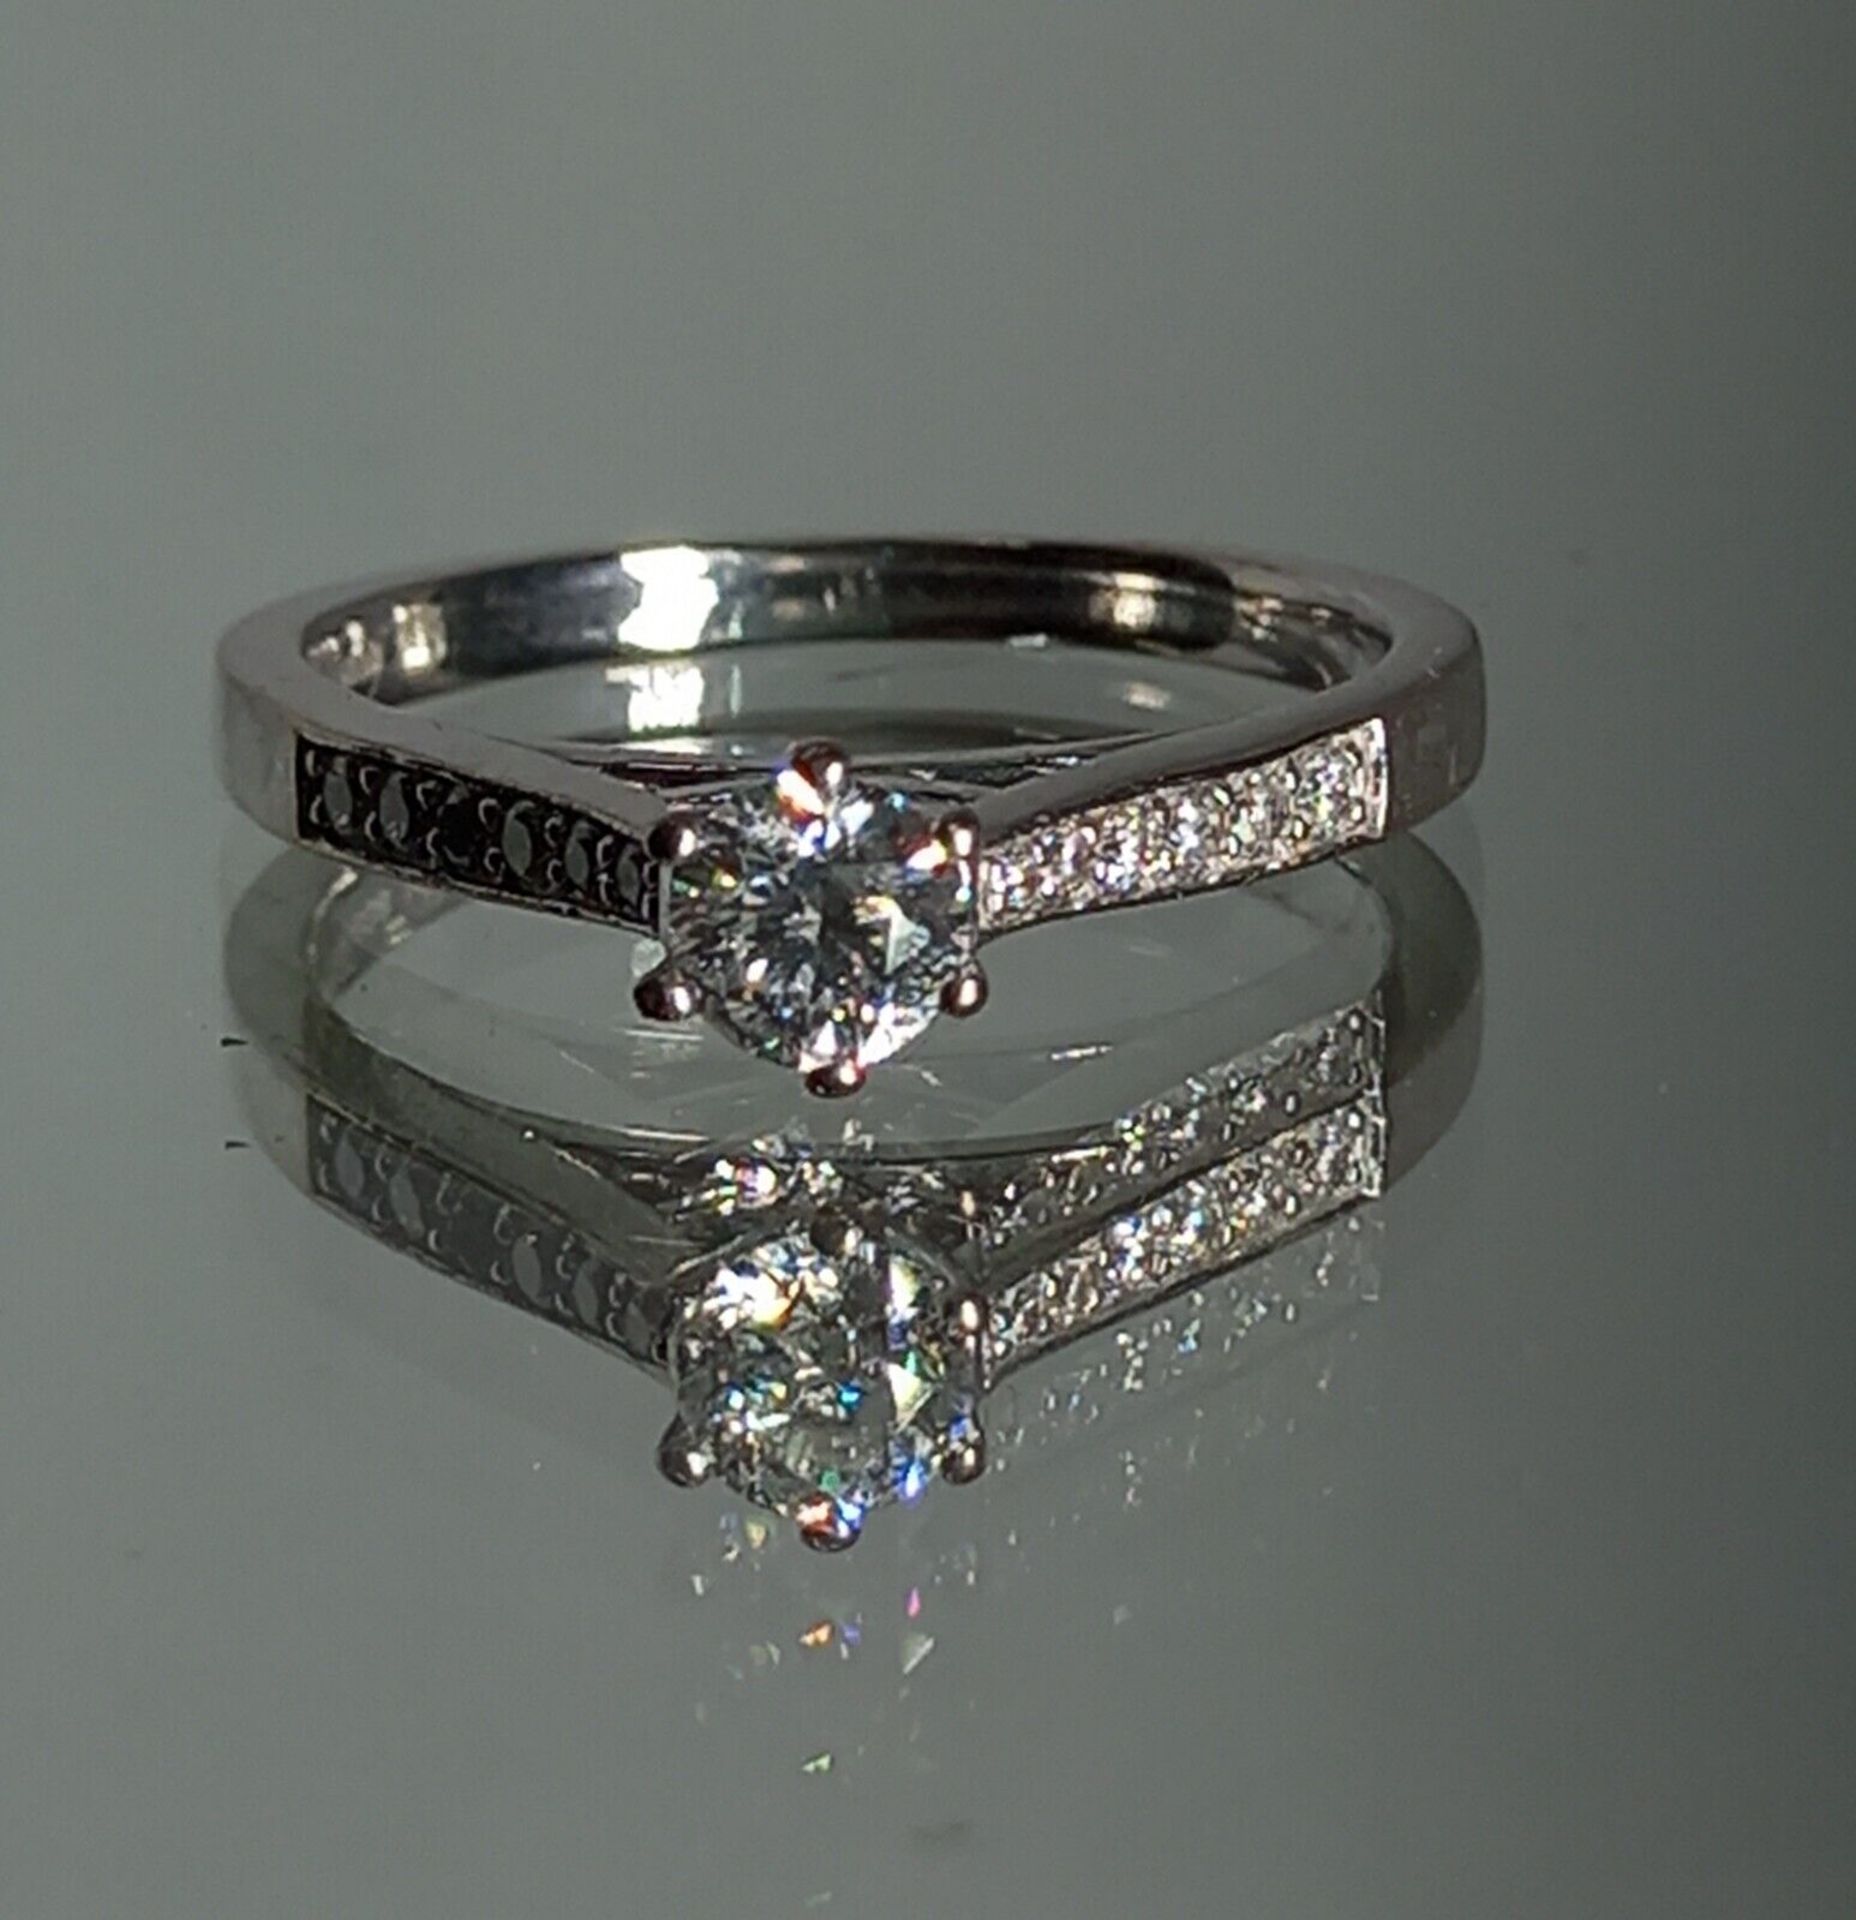 0.35CT DIAMOND ENGAGEMENT RING DIAMOND SHOULDERS IN GIFT BOX WITH VALUATION CERTIFICATE OF £1750 - Image 2 of 4